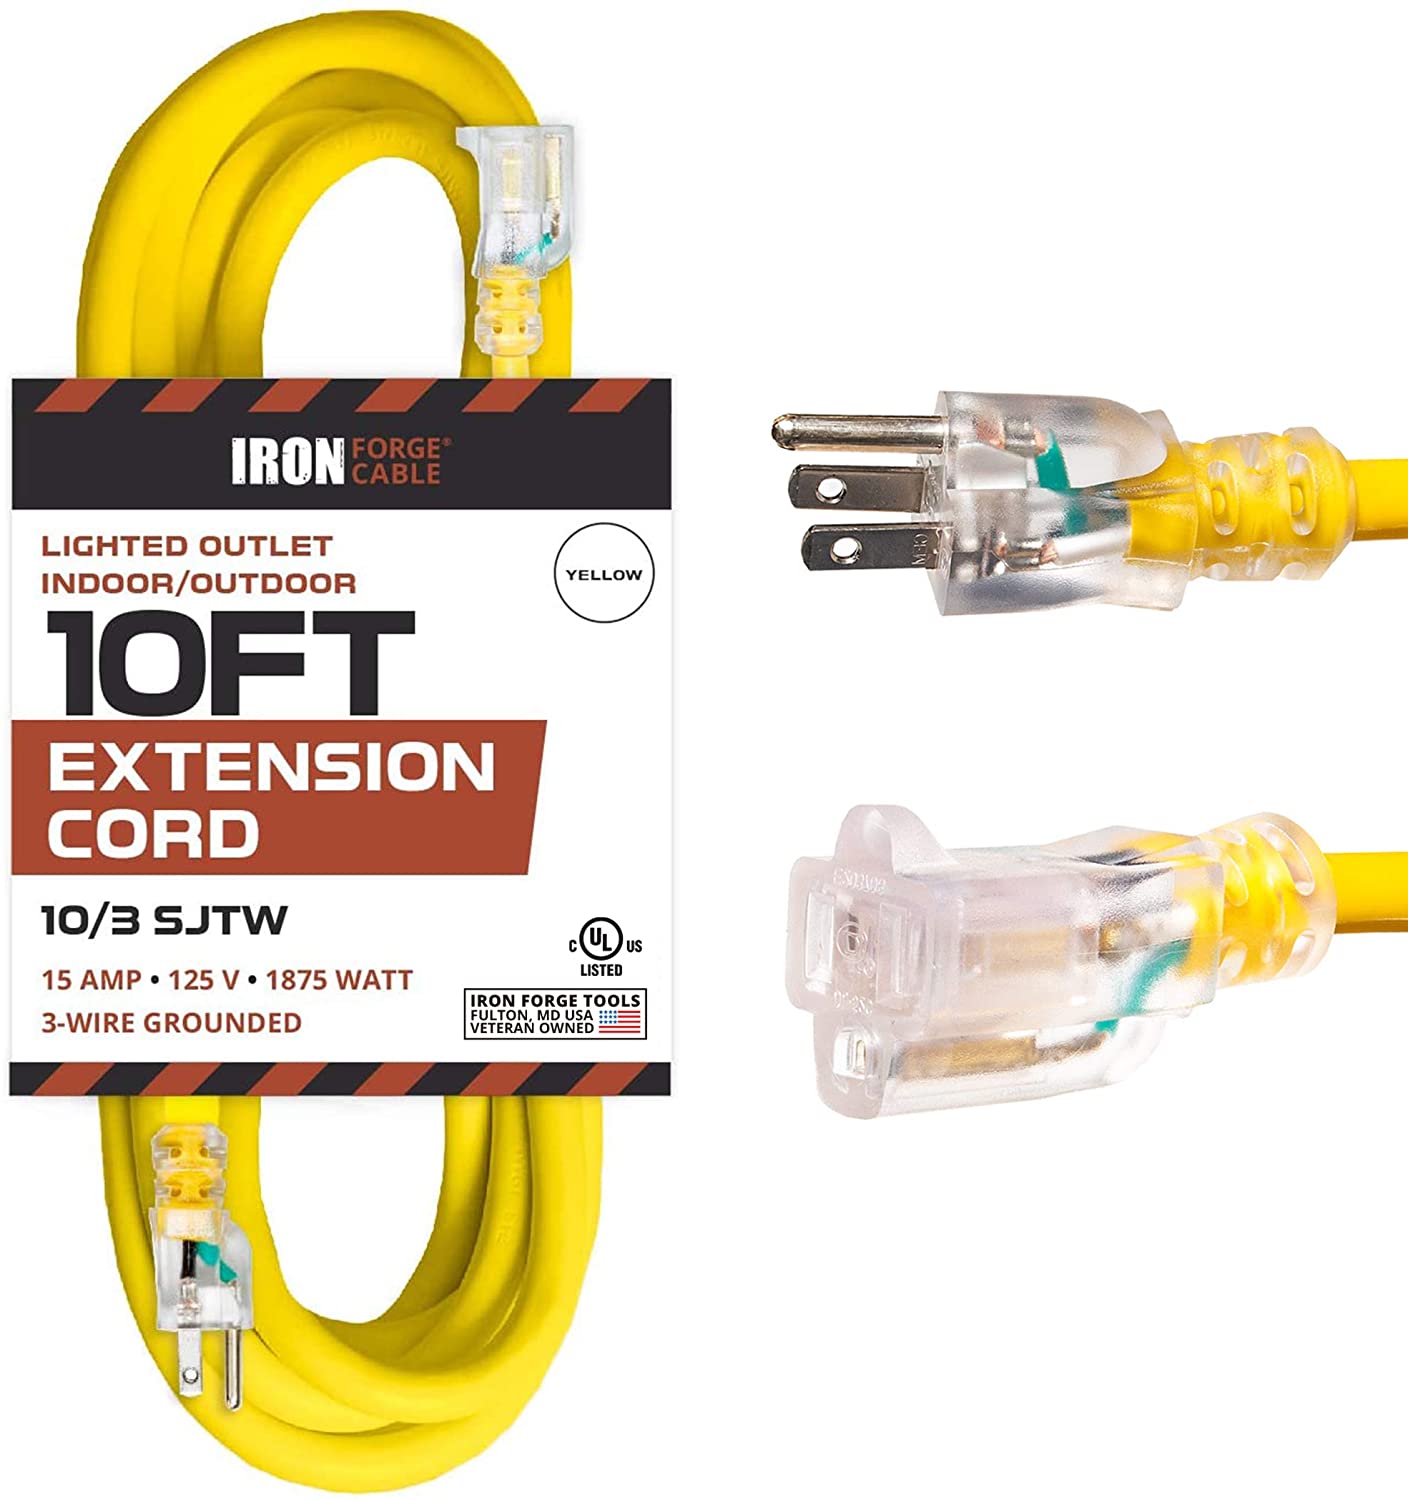 Iron Forge Cable 10 Foot Lighted Outdoor Extension Cord 10/3 SJTW Yellow  10 Gauge Extension Cable with Prong Grounded Plug for Safety Great for  Garden and Major Appliances